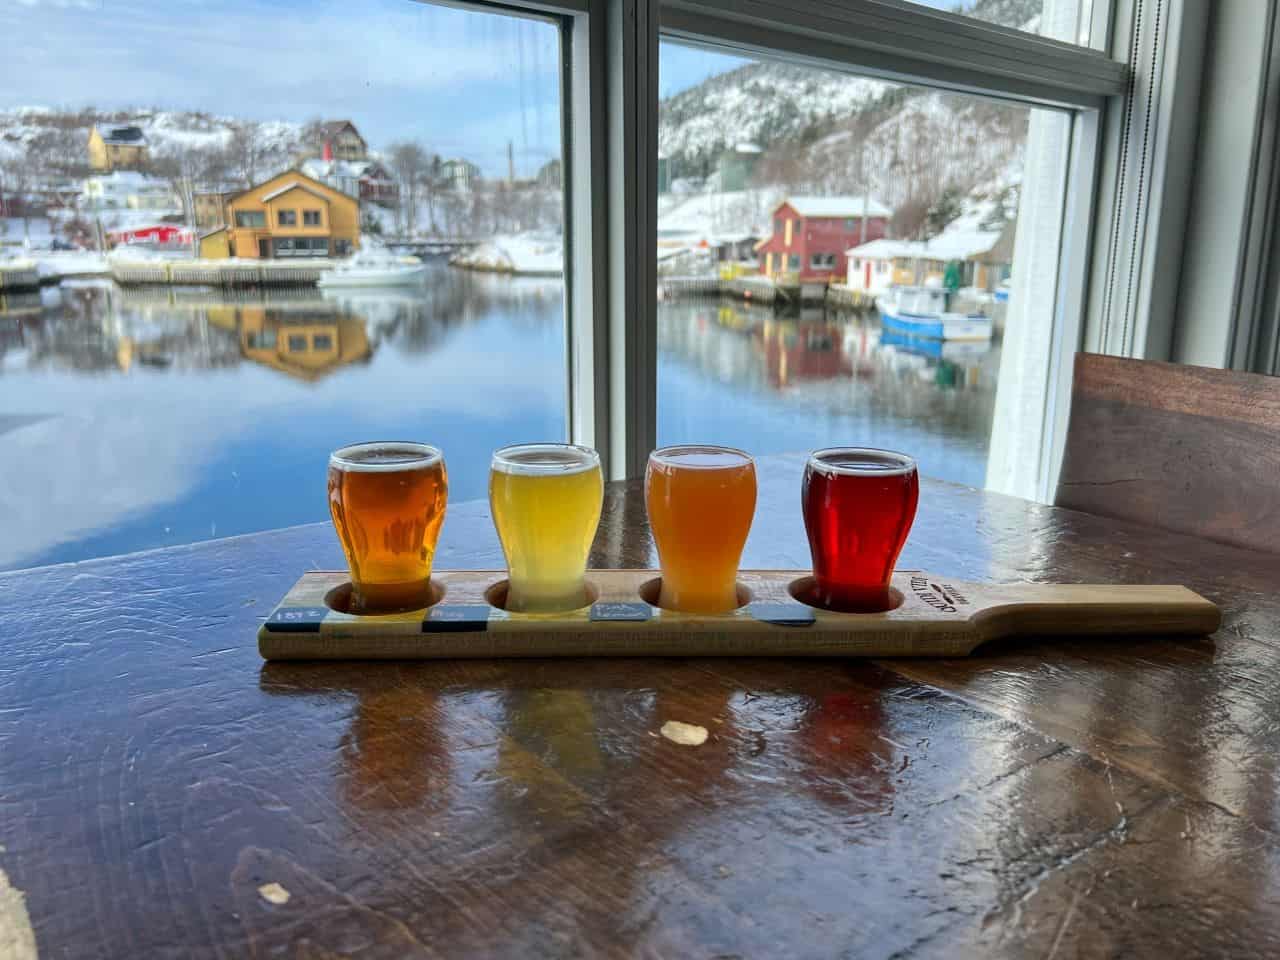 Taste a light of beers with a seaside view in “kitty Vitty” Newfoundland Canada.